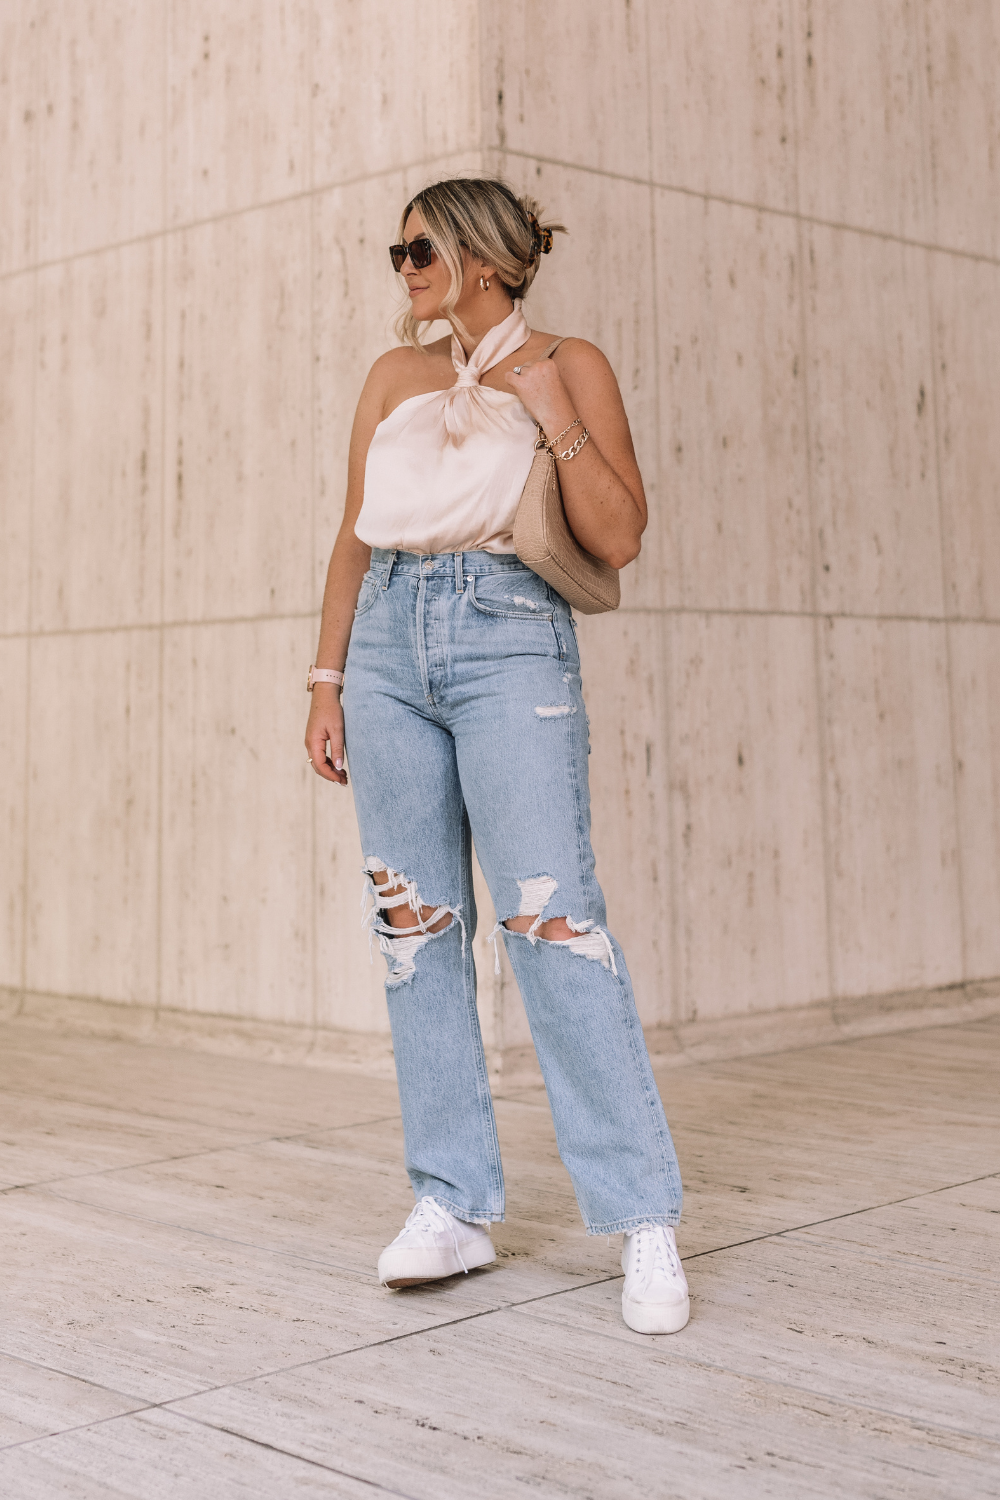 Your Guide to the Best Denim Shorts - Danielle Gervino